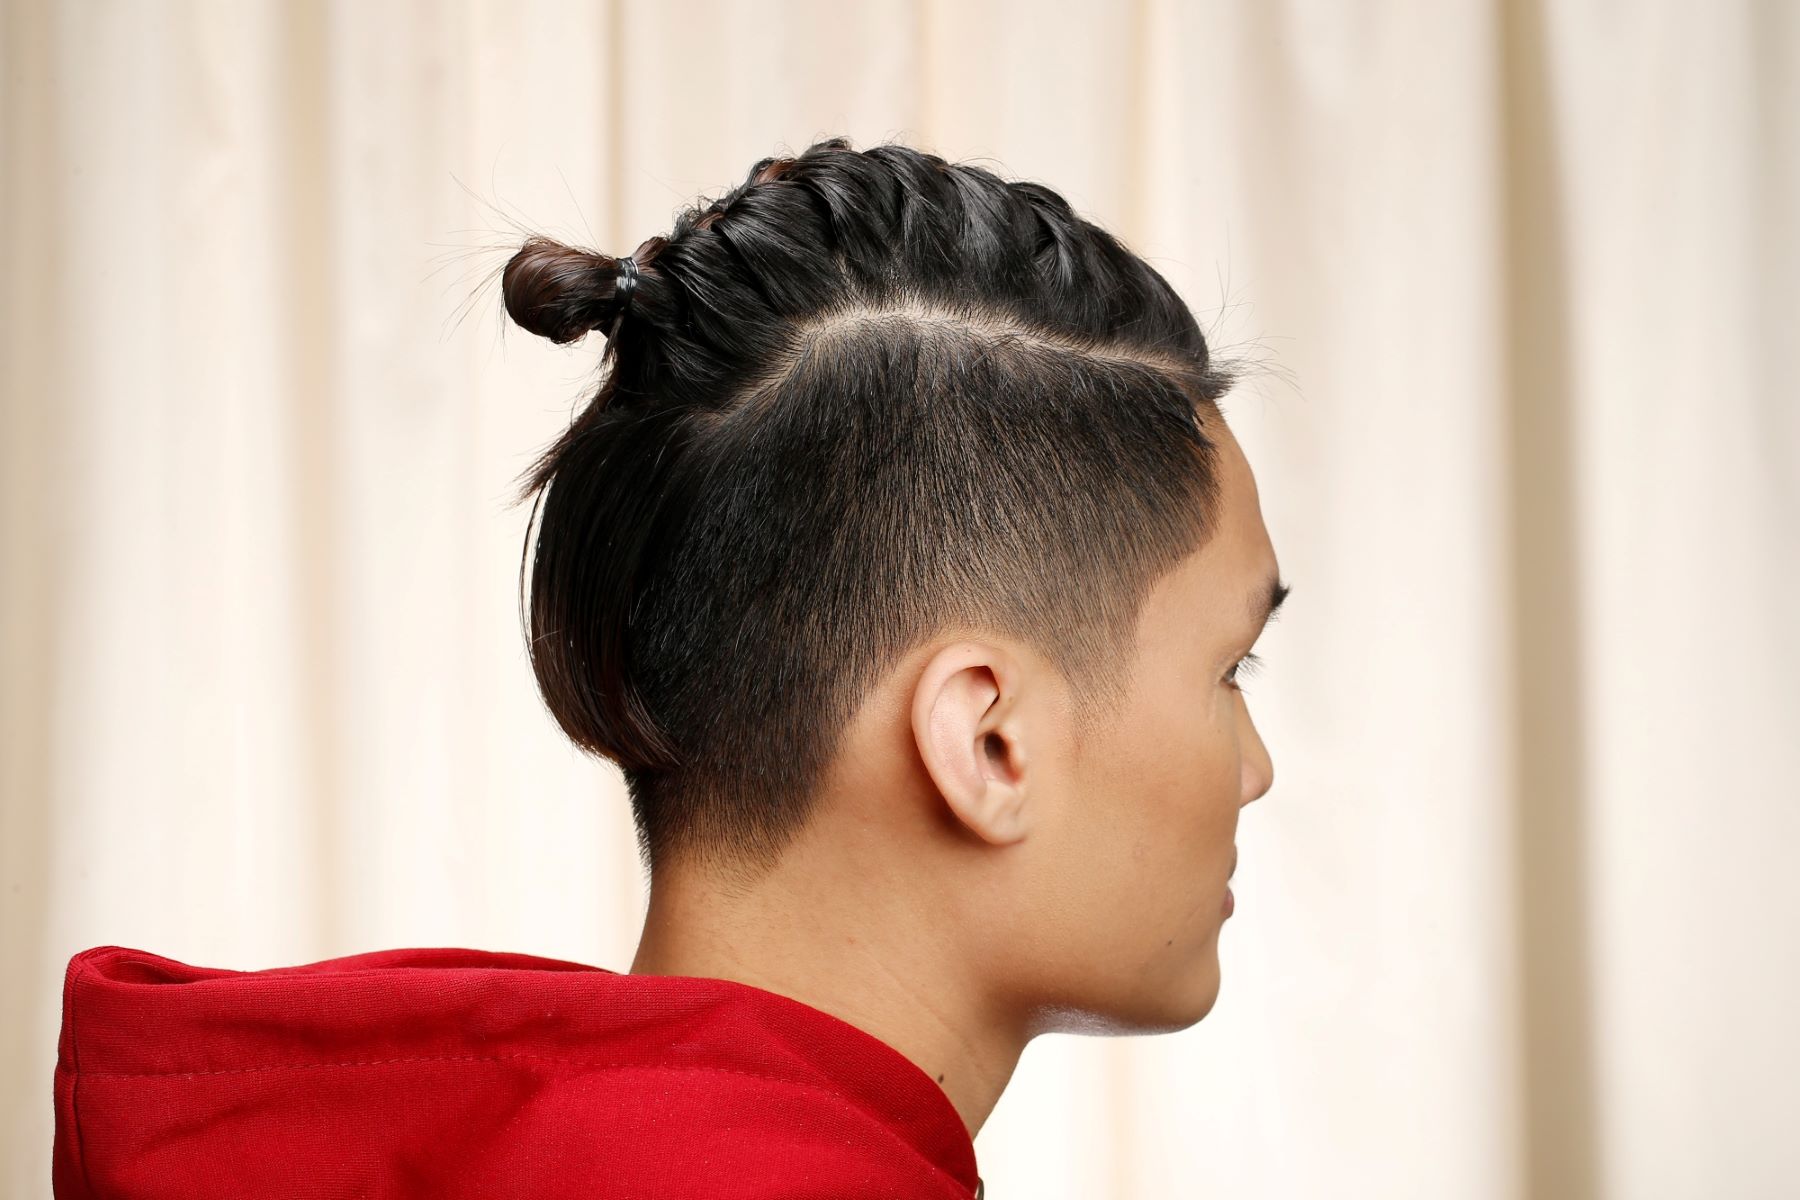 10 Cool Braids For Men That Aren't Cultural Appropriation (No Vikings!)